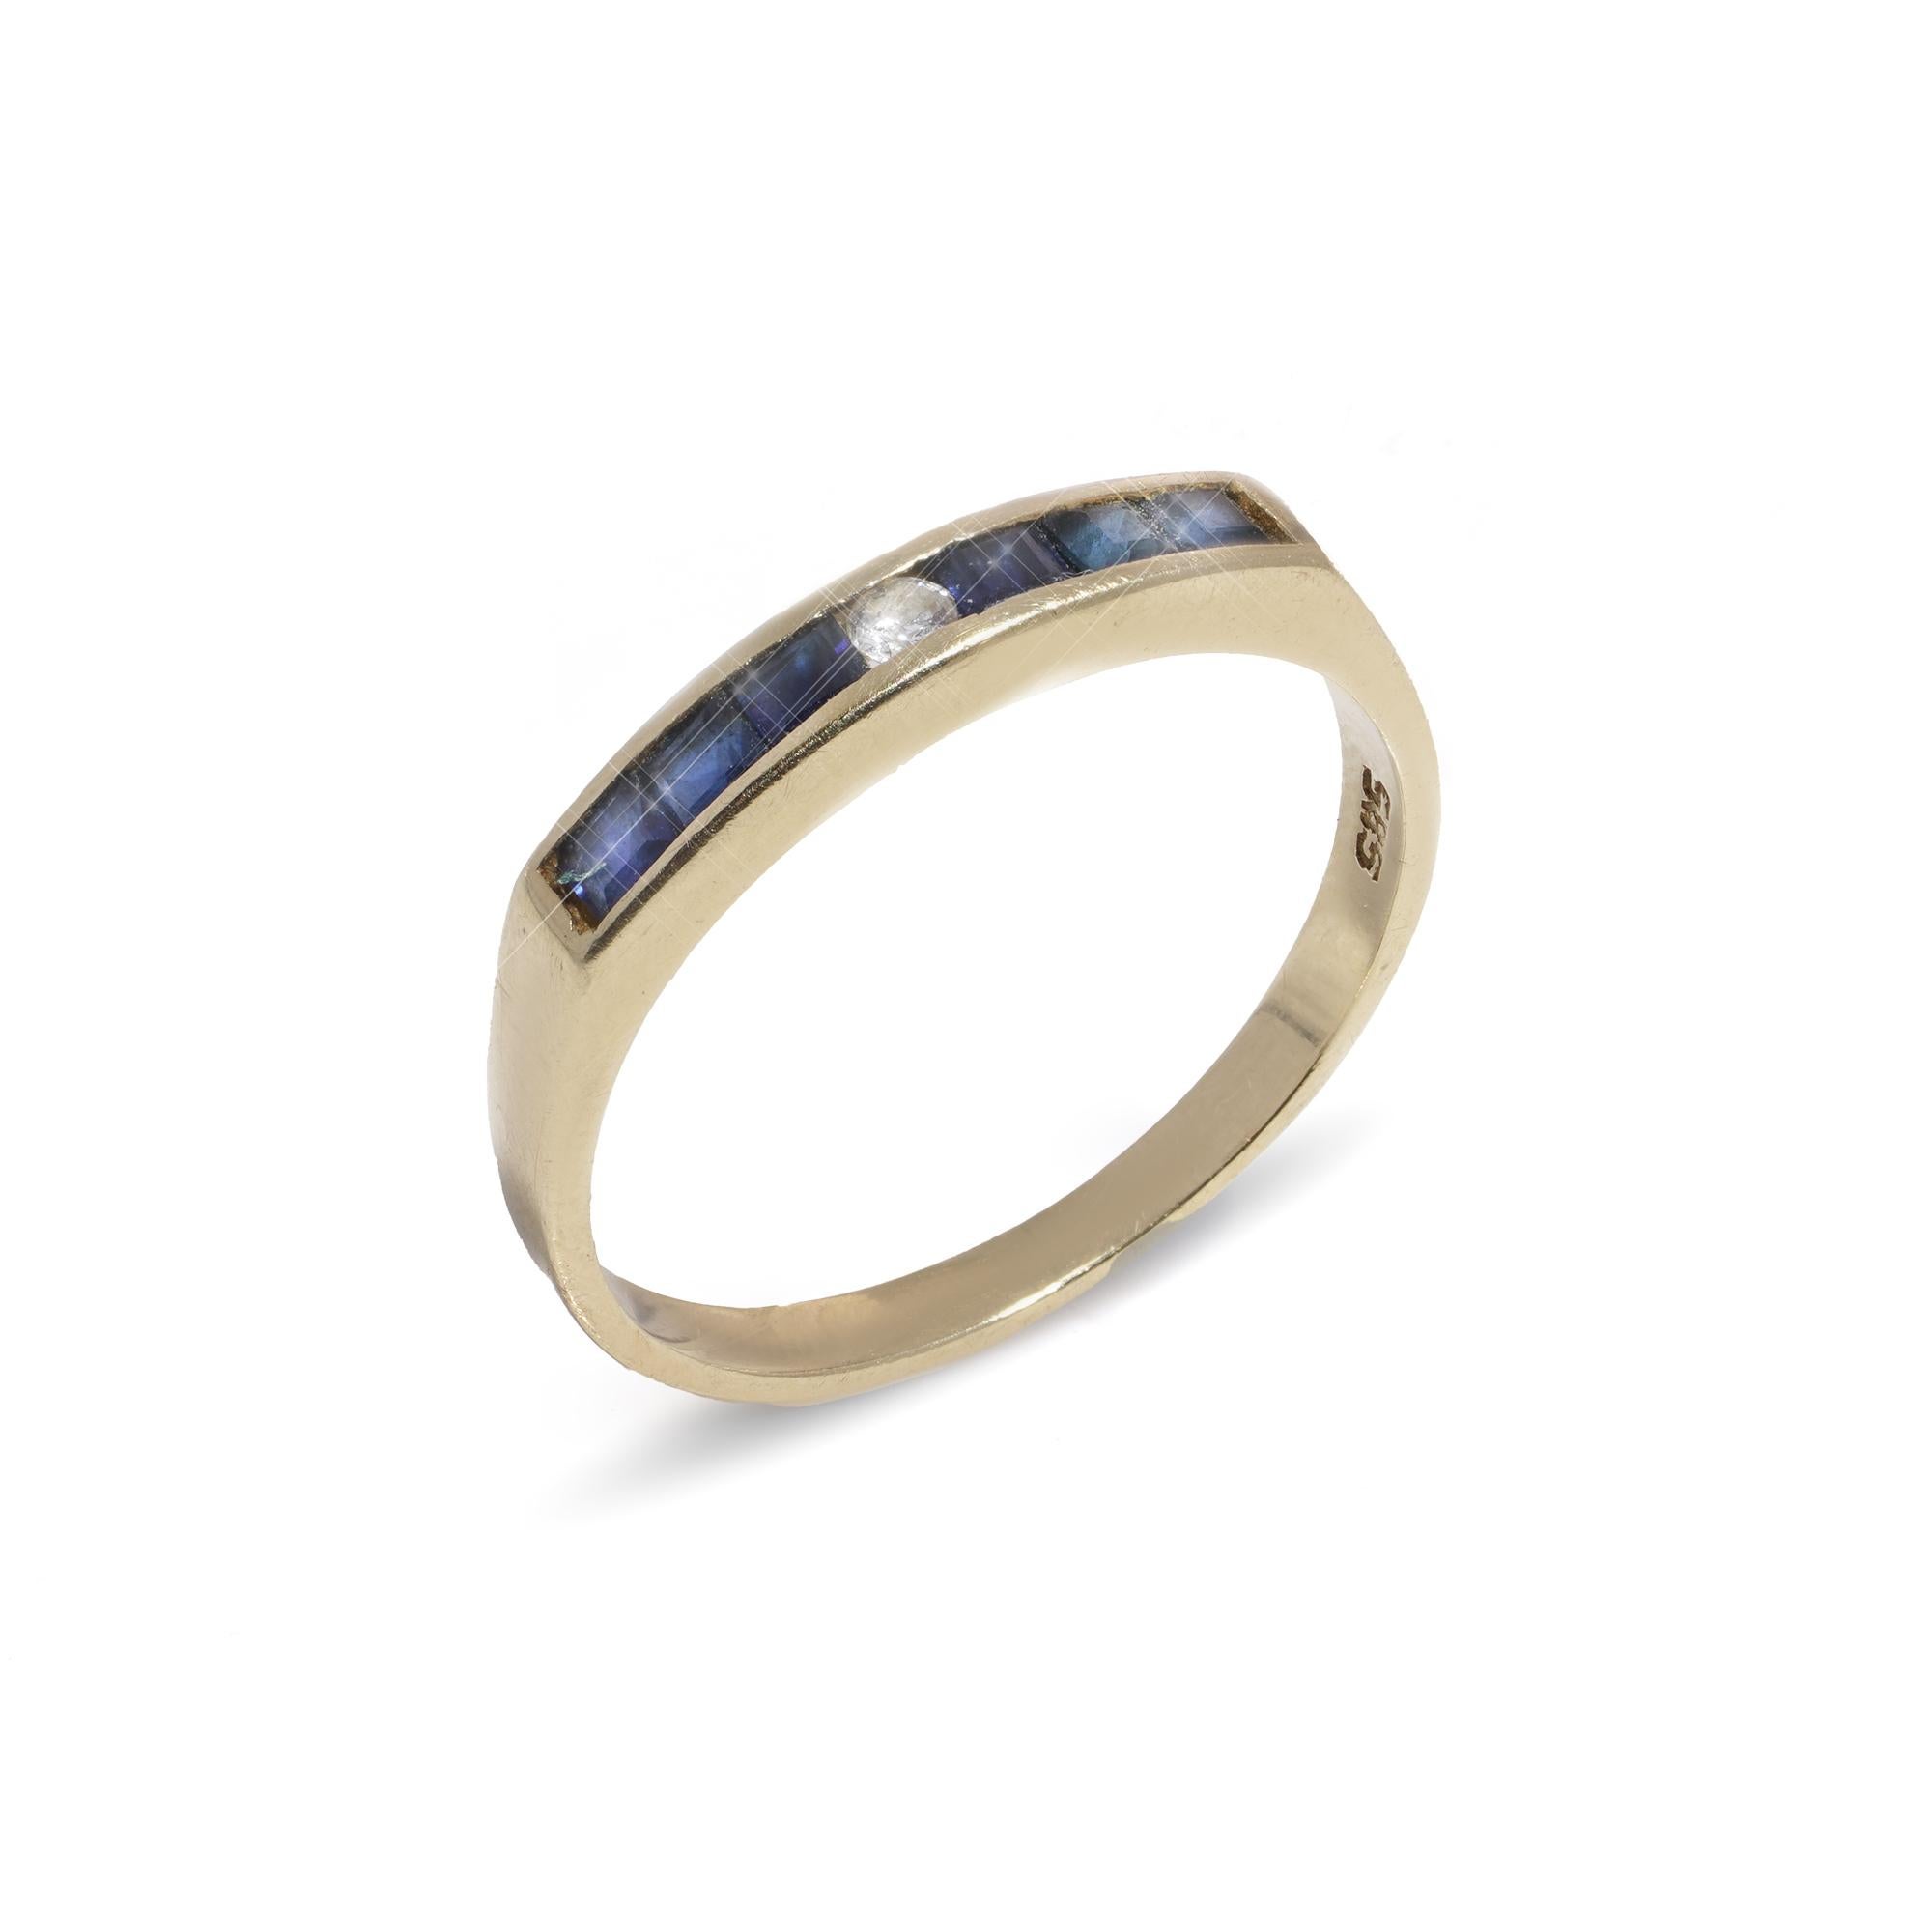 Vintage 14kt yellow gold sapphire and diamond ring. 
hallmarked for 585, 14kt. gold standard. 

Dimensions - 
Finger Size (UK) = K (EU) = 52 (US) = 5.5 
Weight: 2.00  grams

Diamonds - 
Cut: Round brilliant 
Quantity of stones: 1 
Carat weight: 0.02